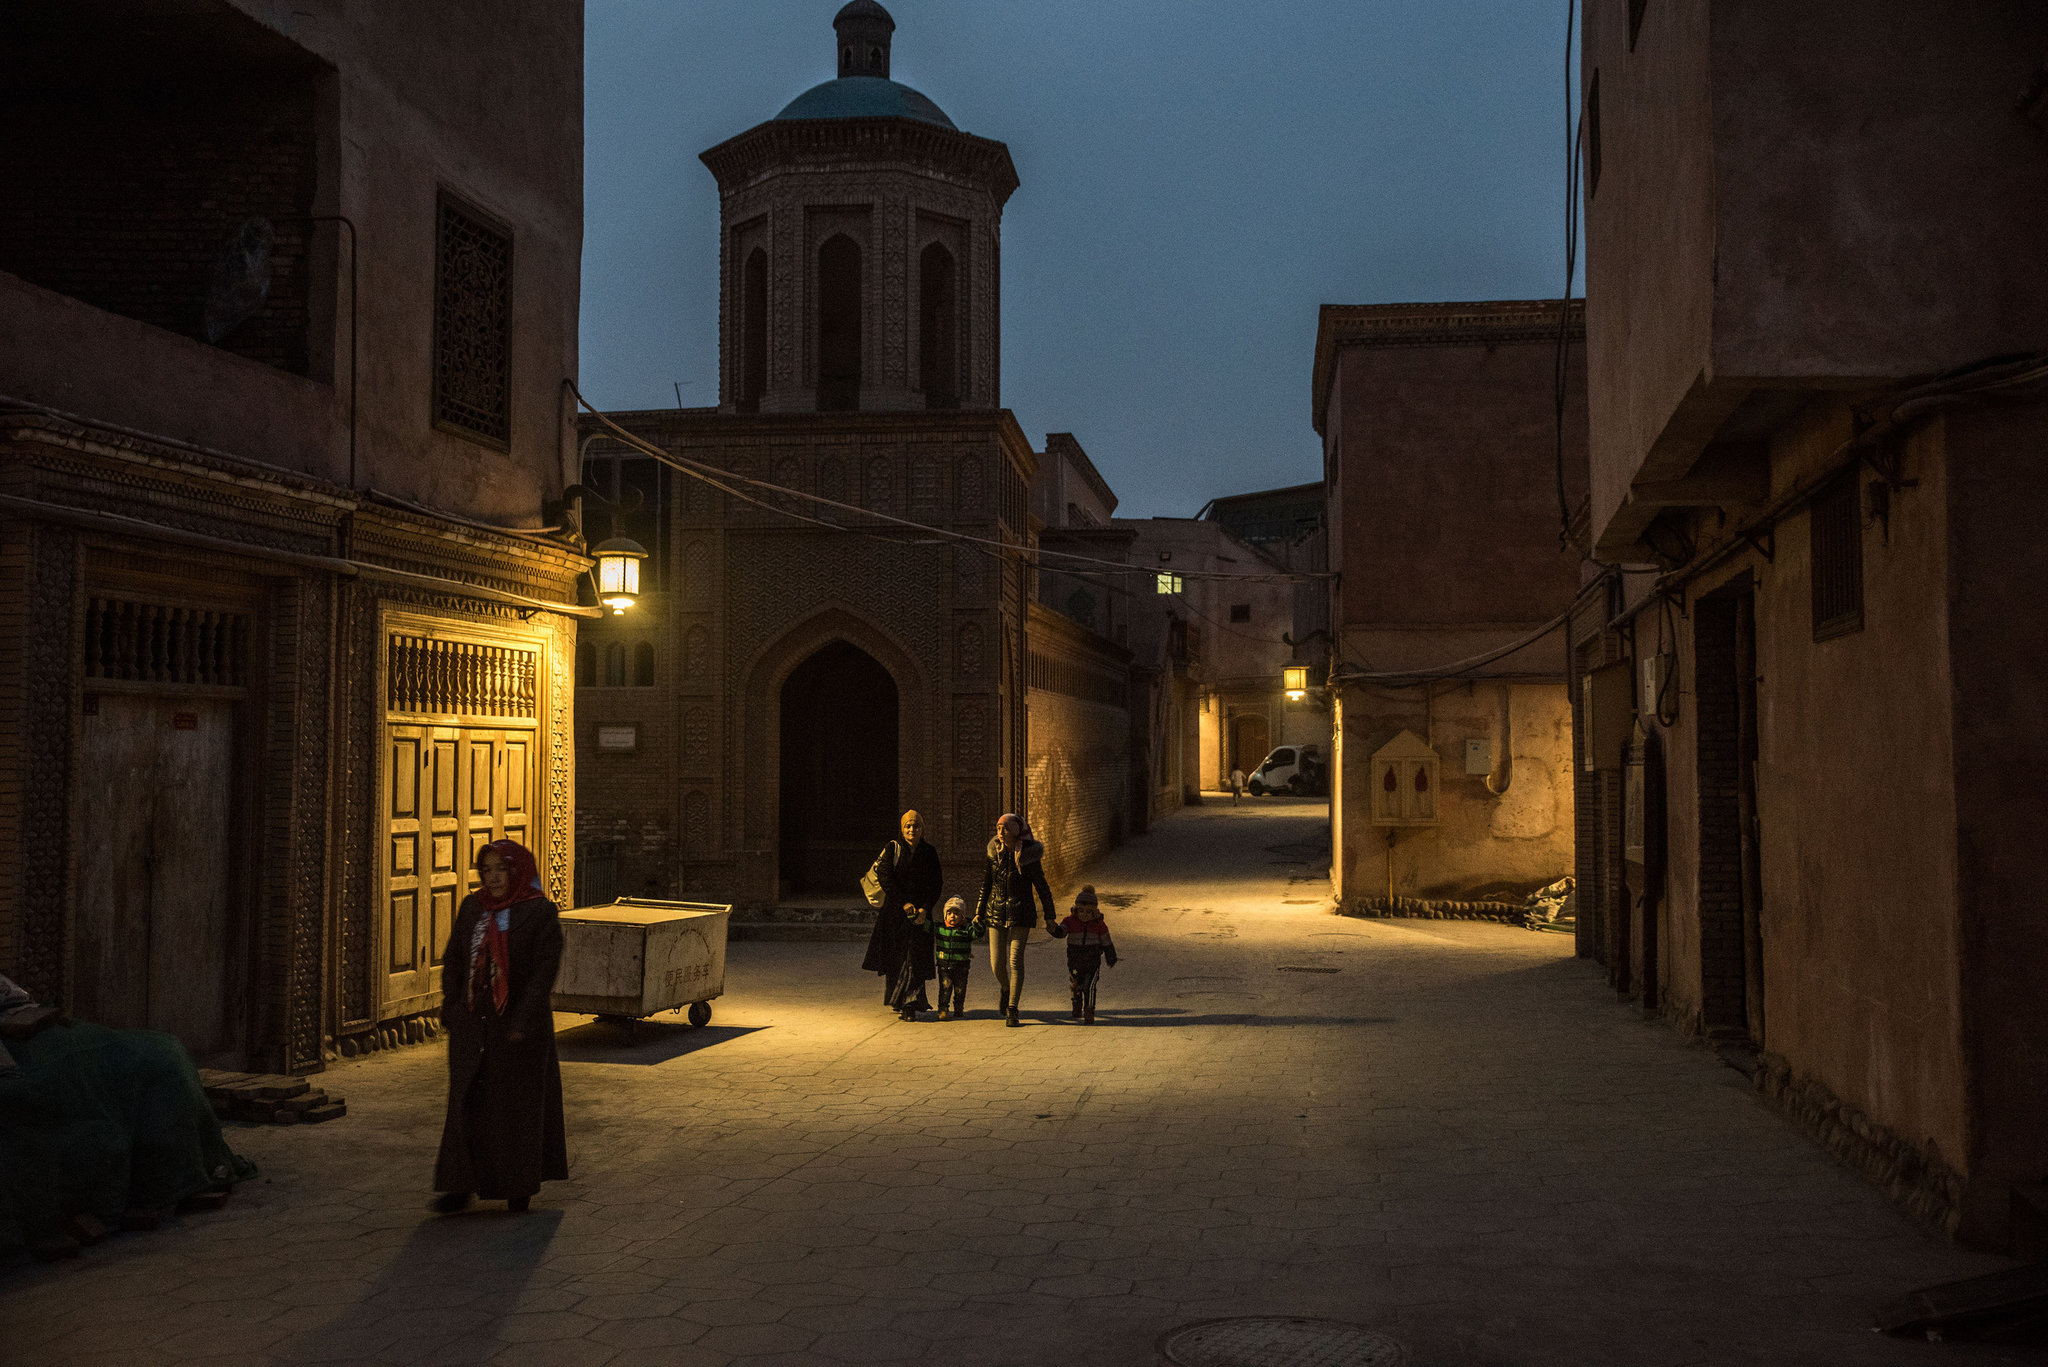 Walking past a mosque in Kashgar, a city in China’s western region of Xinjiang. More than 10 million Uighurs, a mostly Muslim minority group, live in the region. Credit Gilles Sabrie for The New York Times